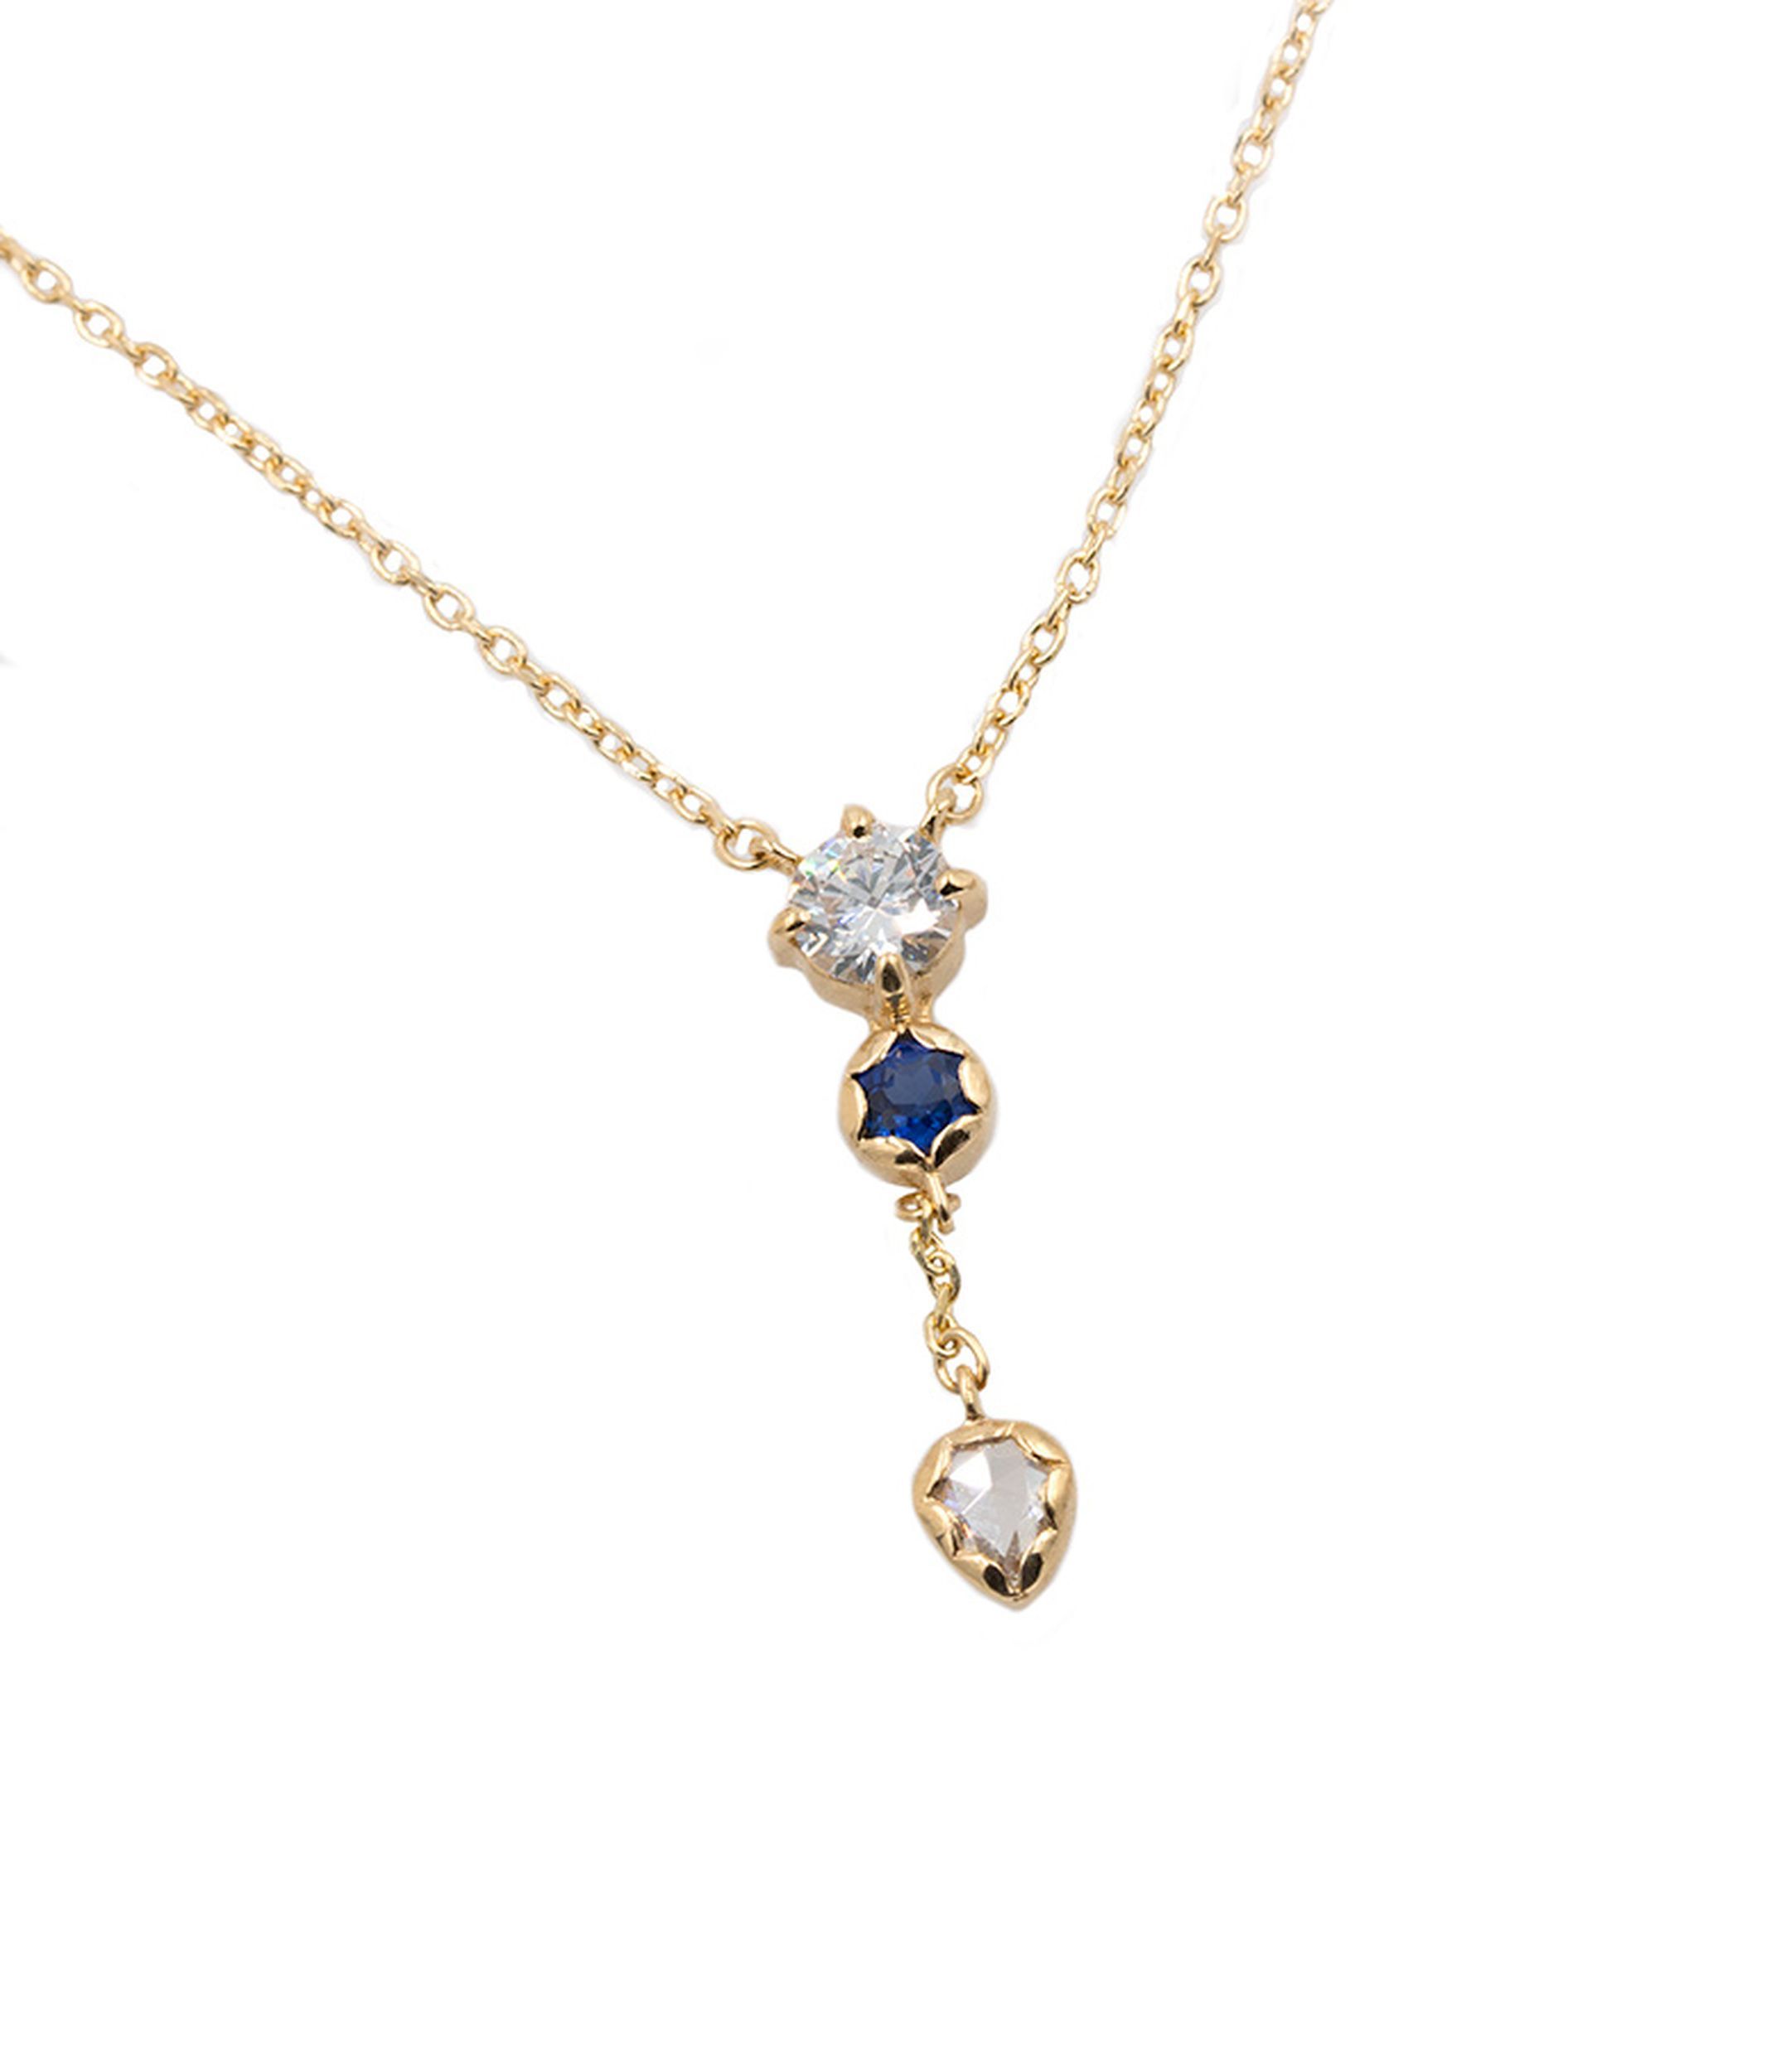 18k Diamond And Blue Sapphire Lariat Necklace | Clothing In Inside 2020 Lariat Pink Sapphire And Diamond Necklaces (View 17 of 25)